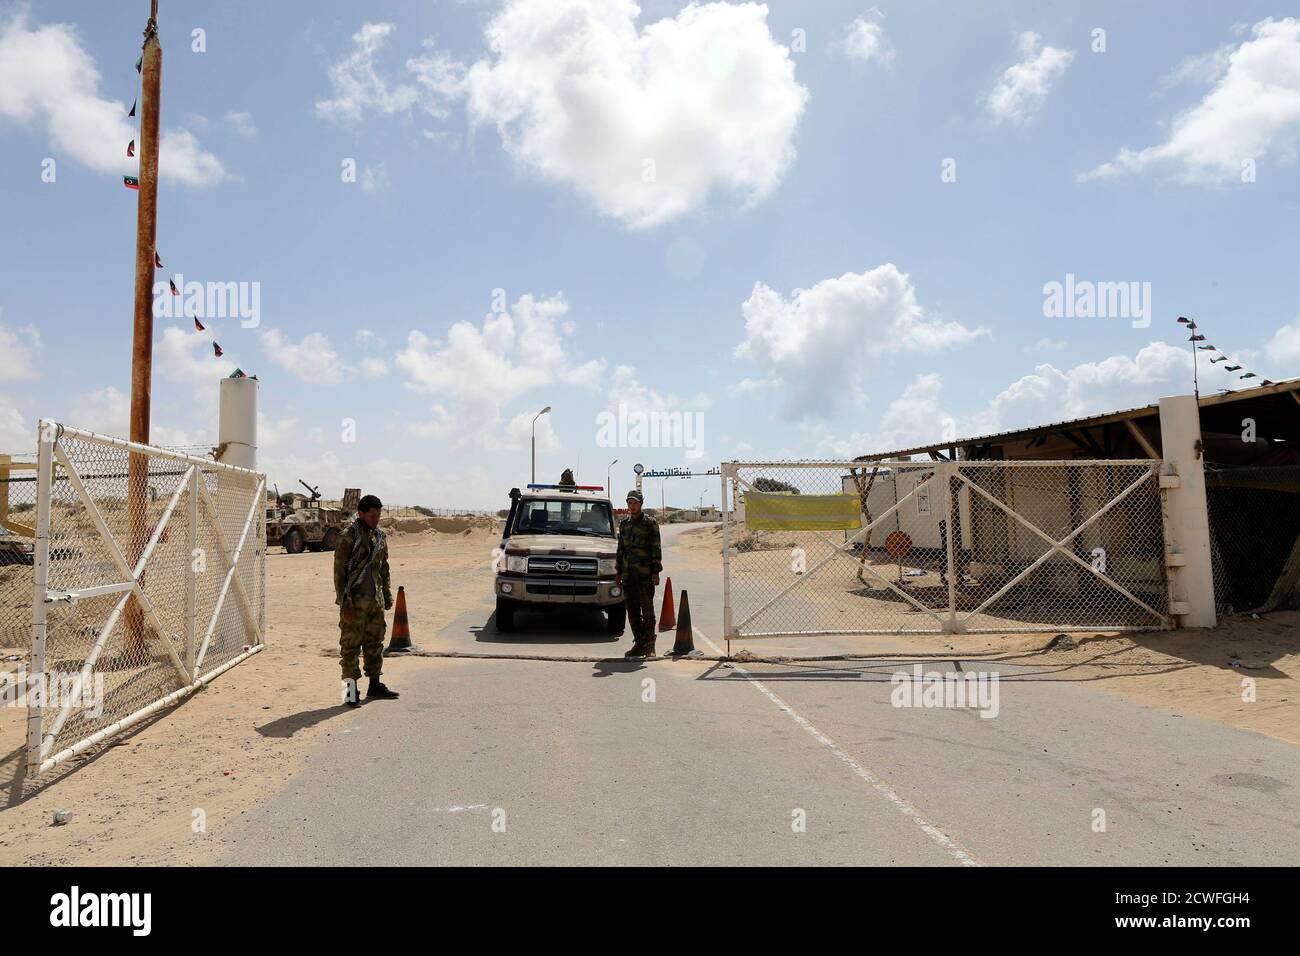 Security officers stand guard at the gates of the Zueitina oil terminal in Zueitina, west of Benghazi April 7, 2014. Libya's Zueitina oil port prepared on Monday to load crude on tankers after the government reached a deal with rebels to reopen four terminals that insurgents have occupied since summer. The federalist rebels agreed on Sunday to end gradually their eight-month blockade of Zueitina, Hariga, Ras Lanuf and Es Sider ports, which account for around 700,000 barrels per day of the OPEC country's crude exports. REUTERS/Esam Omran Al-Fetori (LIBYA  - Tags: POLITICS ENERGY BUSINESS) Stock Photo